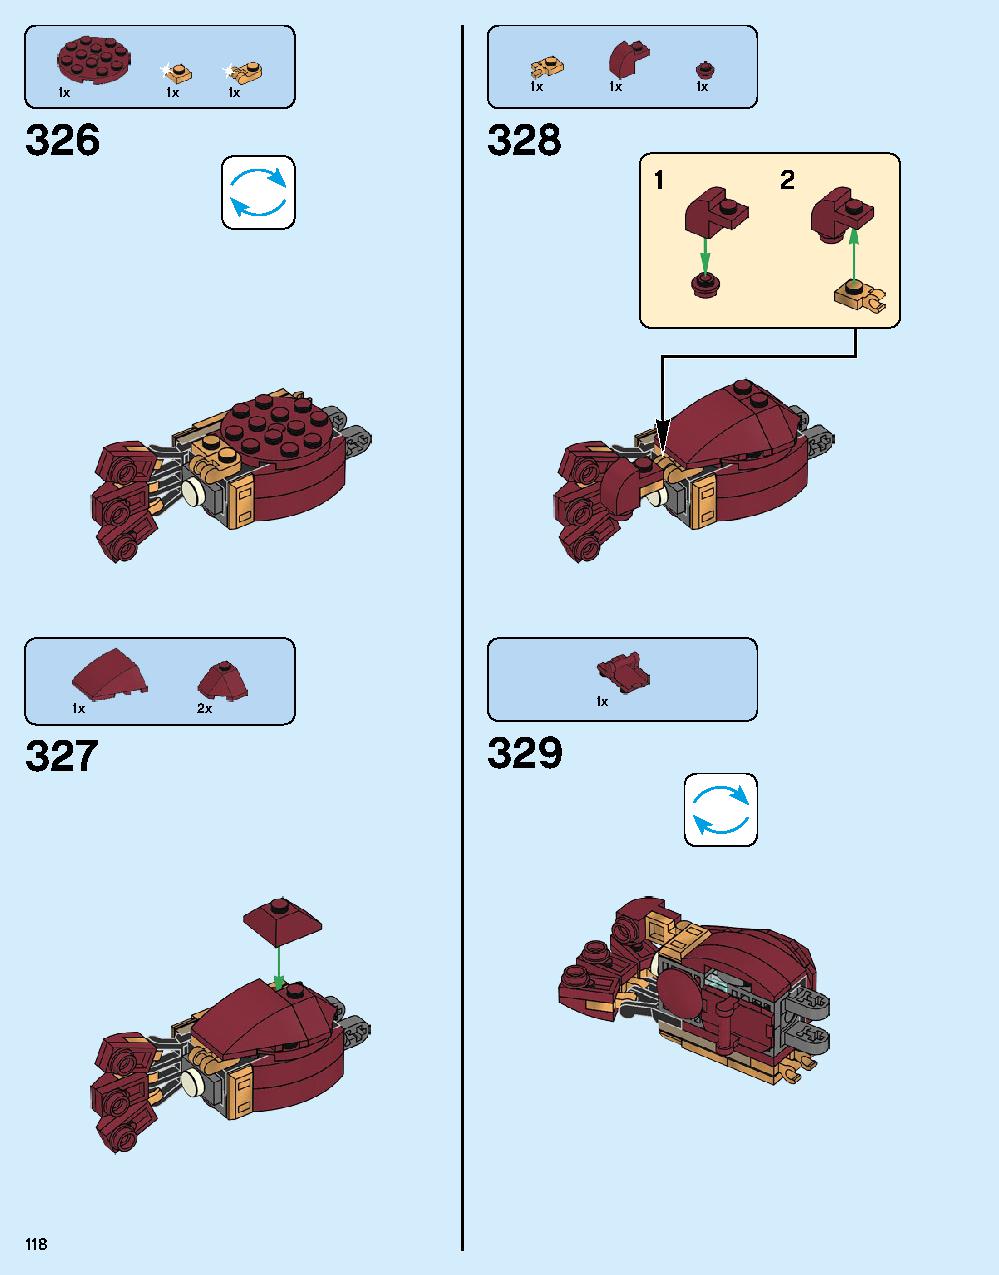 The Hulkbuster: Ultron Edition 76105 LEGO information LEGO instructions 118 page